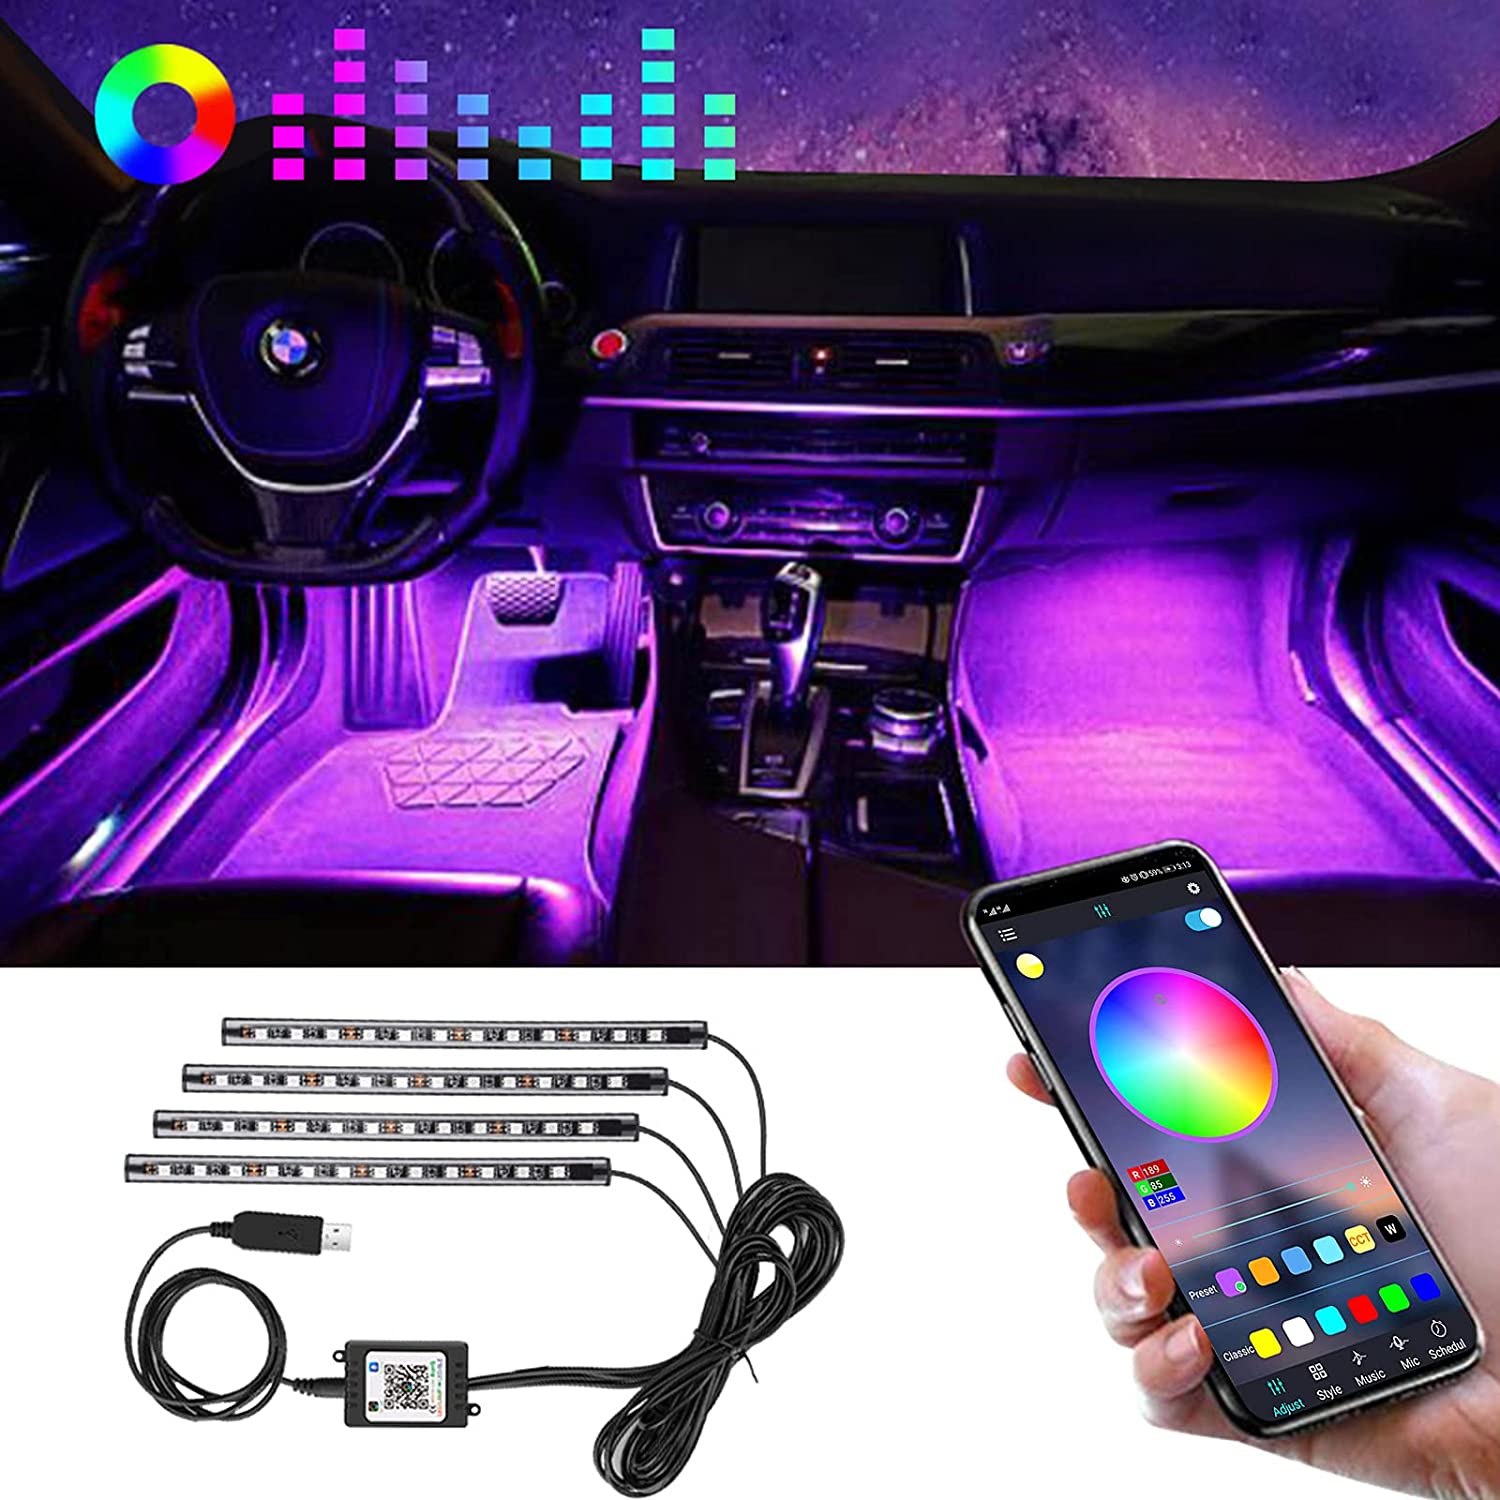 Yoluxzm Car Led Lights Interior 4 Pcs 48 Led Strip Light for Car with USB Port APP Control for iPhone Android Smart Phone Infinite DIY Colors Music Microphone Control